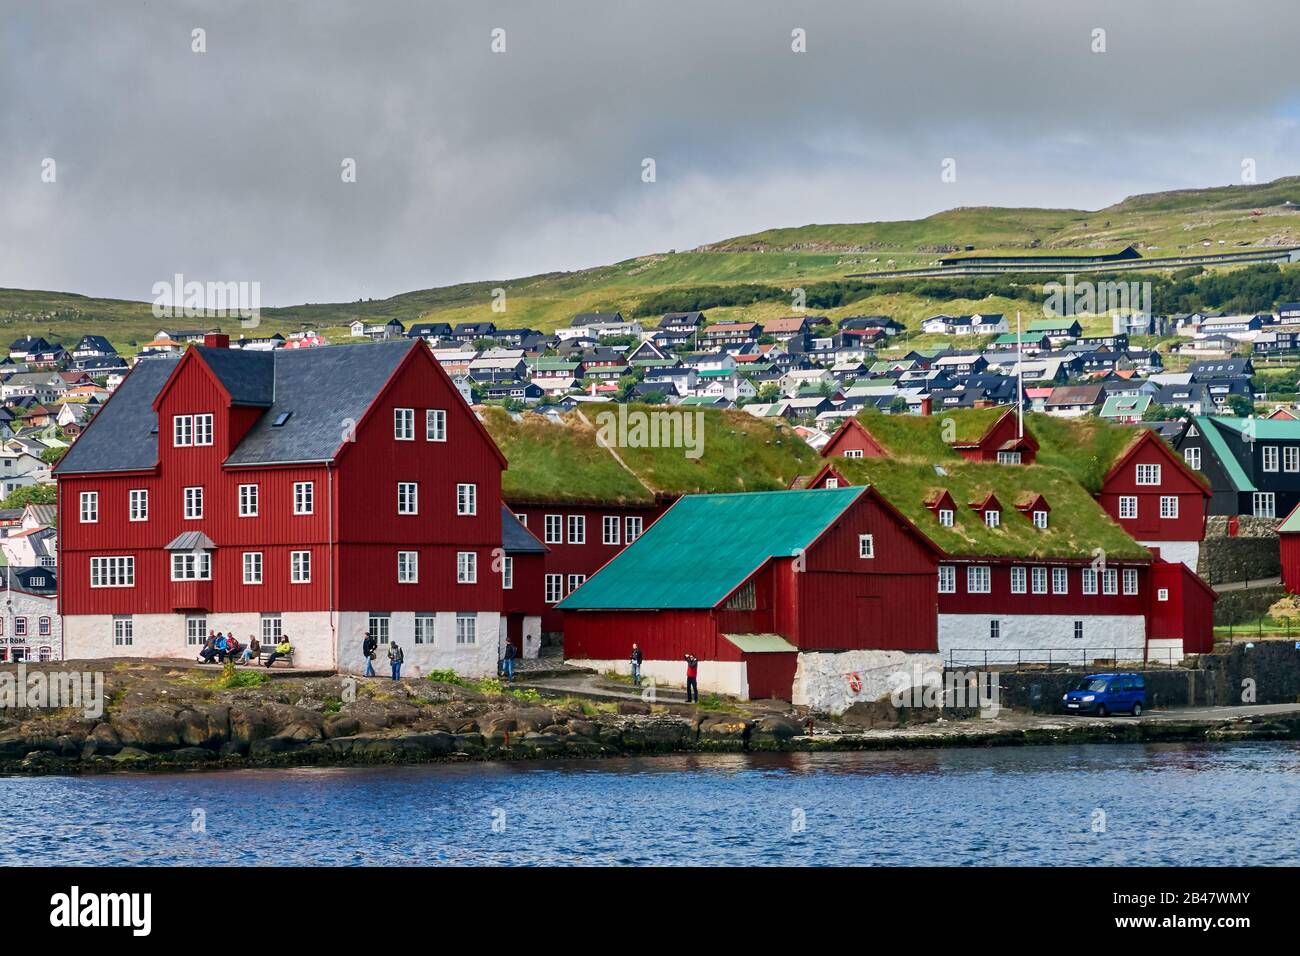 Denmark, Tinganes peninsula , Torshavn, Streymoy, Faroe Islands. Tinganes is the historic location of the Faroese landsstýri (government), and is a central part of Tórshavn. The name Tinganes means 'parliament jetty' or 'parliament point' in Faroese. Many of the wooden houses on Tinganes were built in the 16th and 17th centuries and have the typical red color as well as grass roof, that is very common on the Faroe Islands. Stock Photo